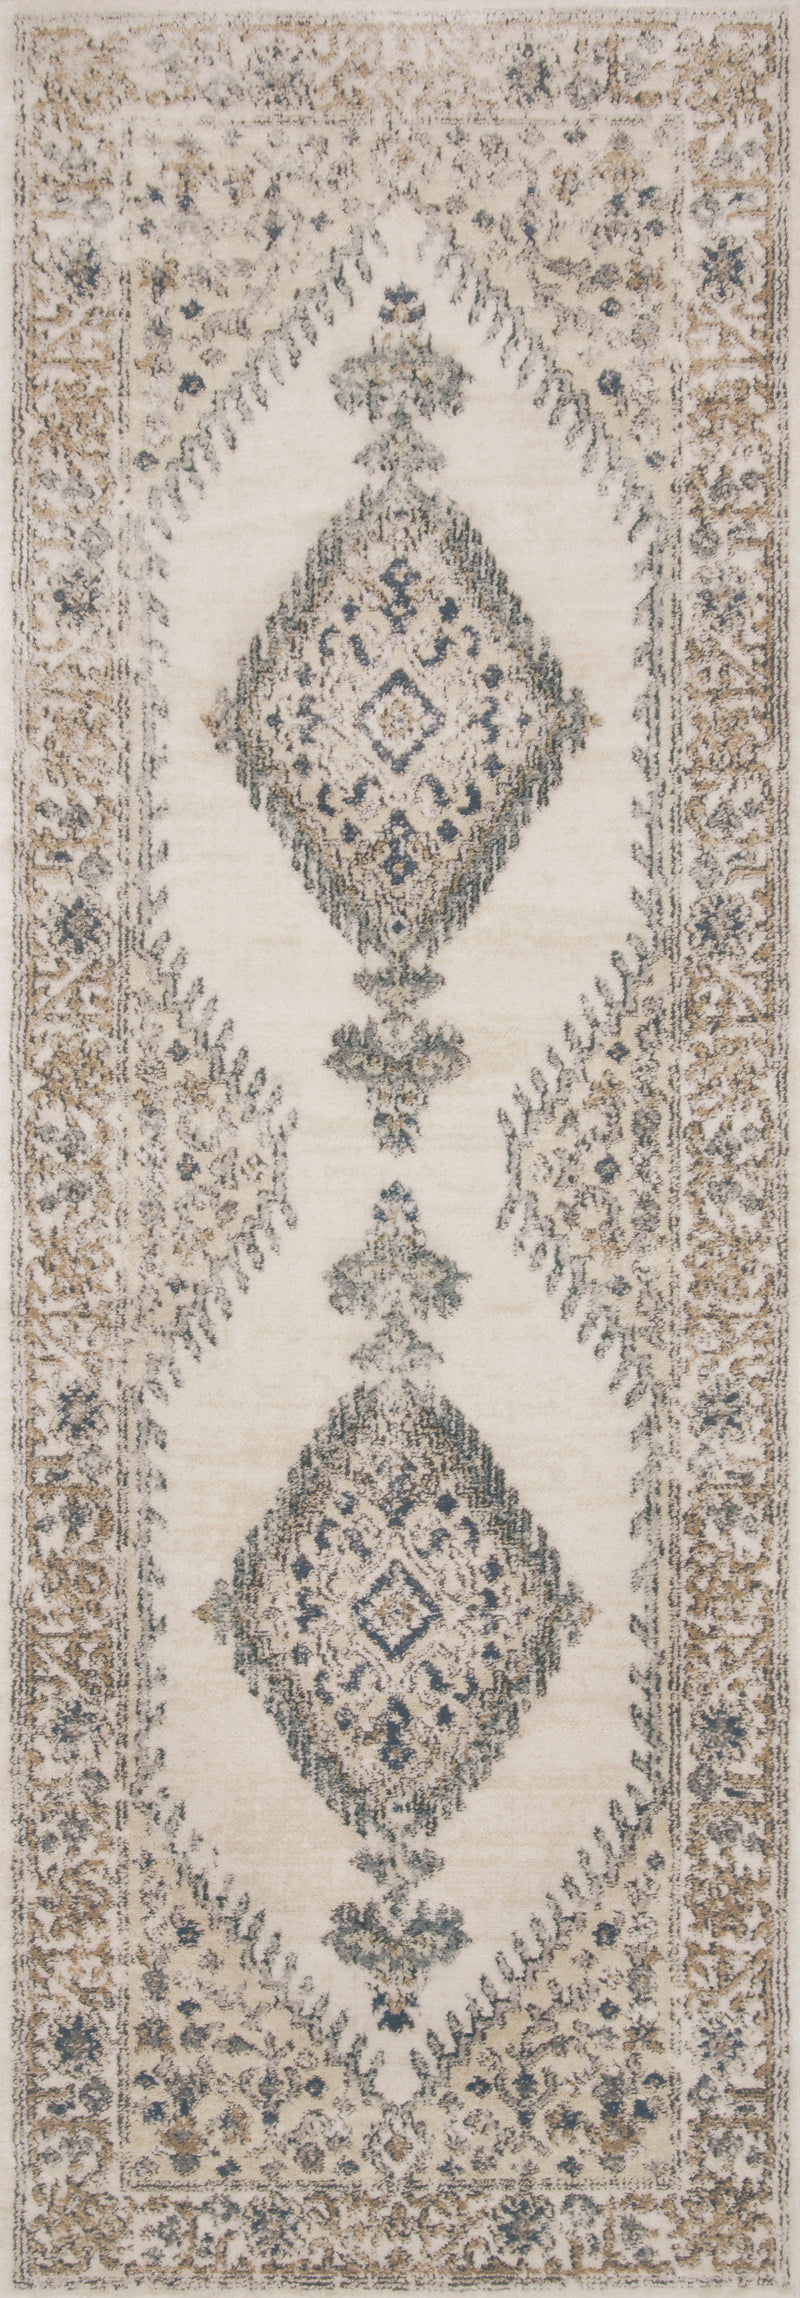 media image for Teagan Rug in Oatmeal / Ivory by Loloi II 275